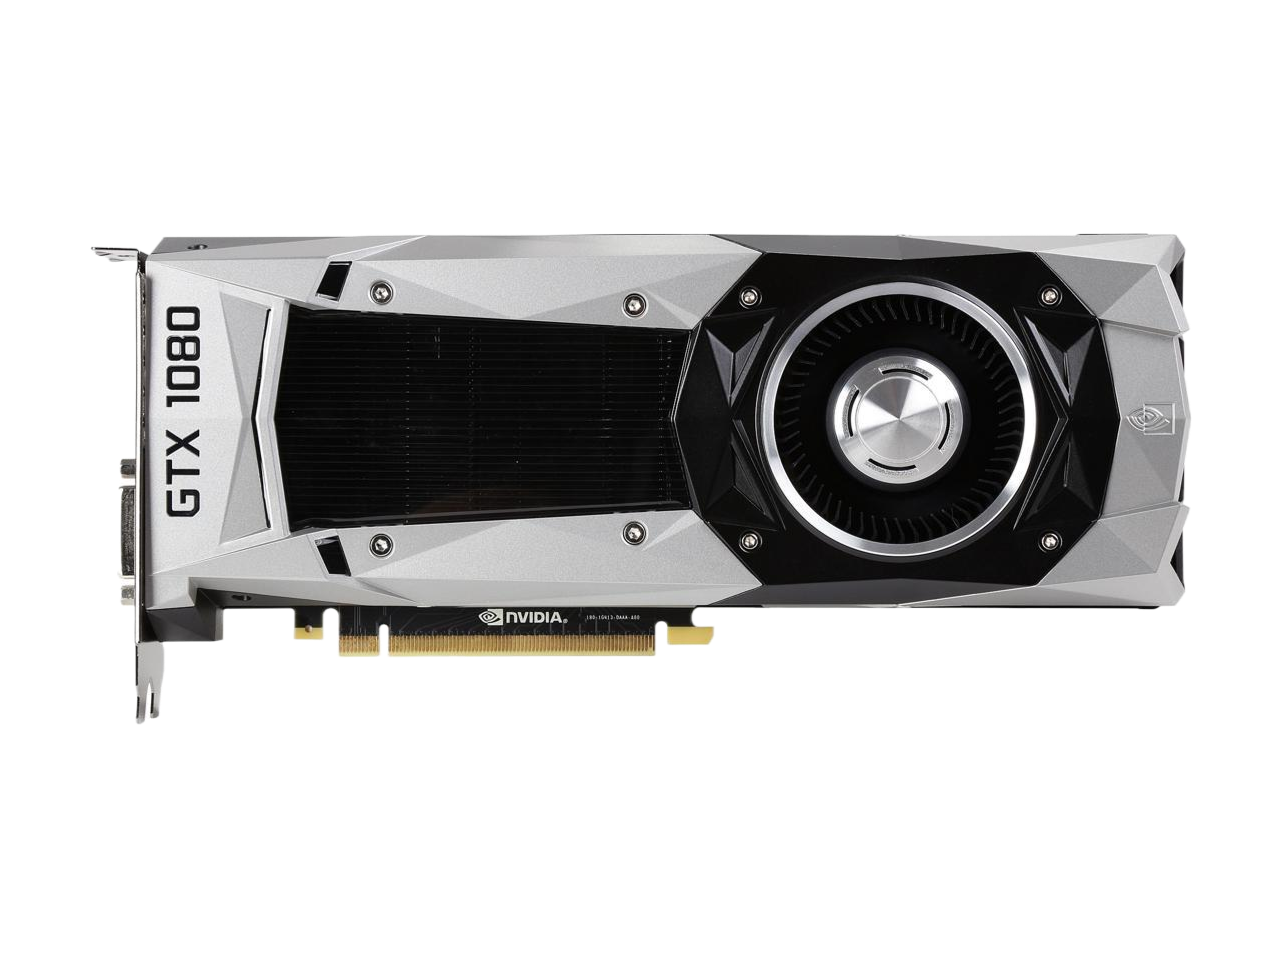 EVGA GeForce GTX 1080 Founders Edition 8GB GDDR5X LED DX12 OSD Support (PXOC) Graphics Card 08G-P4-6180-RX